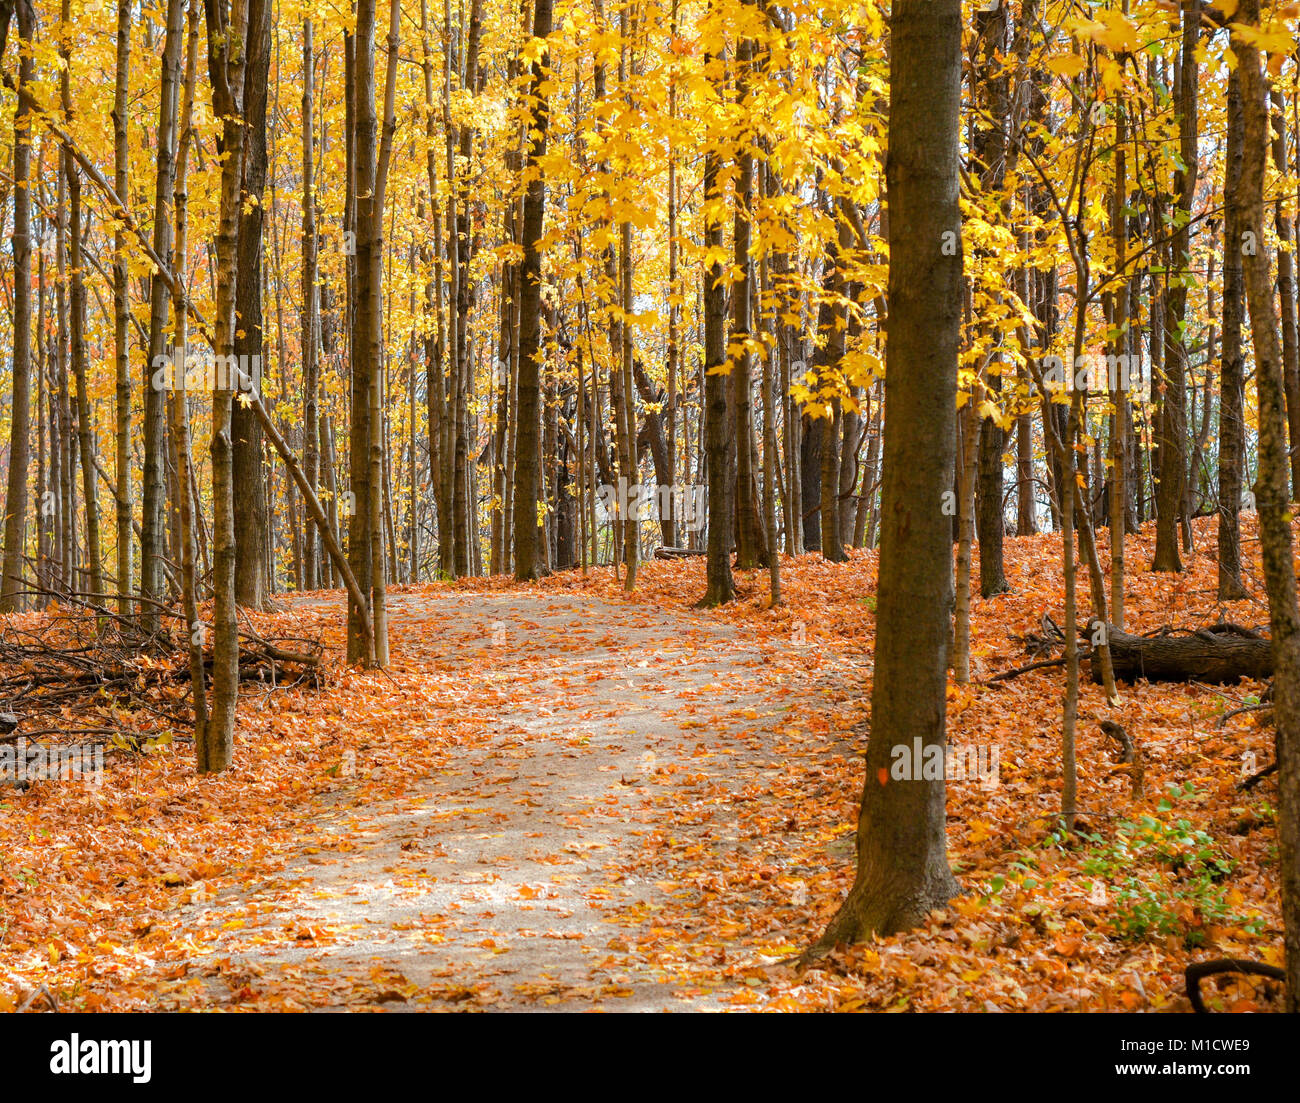 A gravel trail through the woods. Fallen leaves blanket the area. Bright yellow leaves cling to the surrounding tall trees. Stock Photo